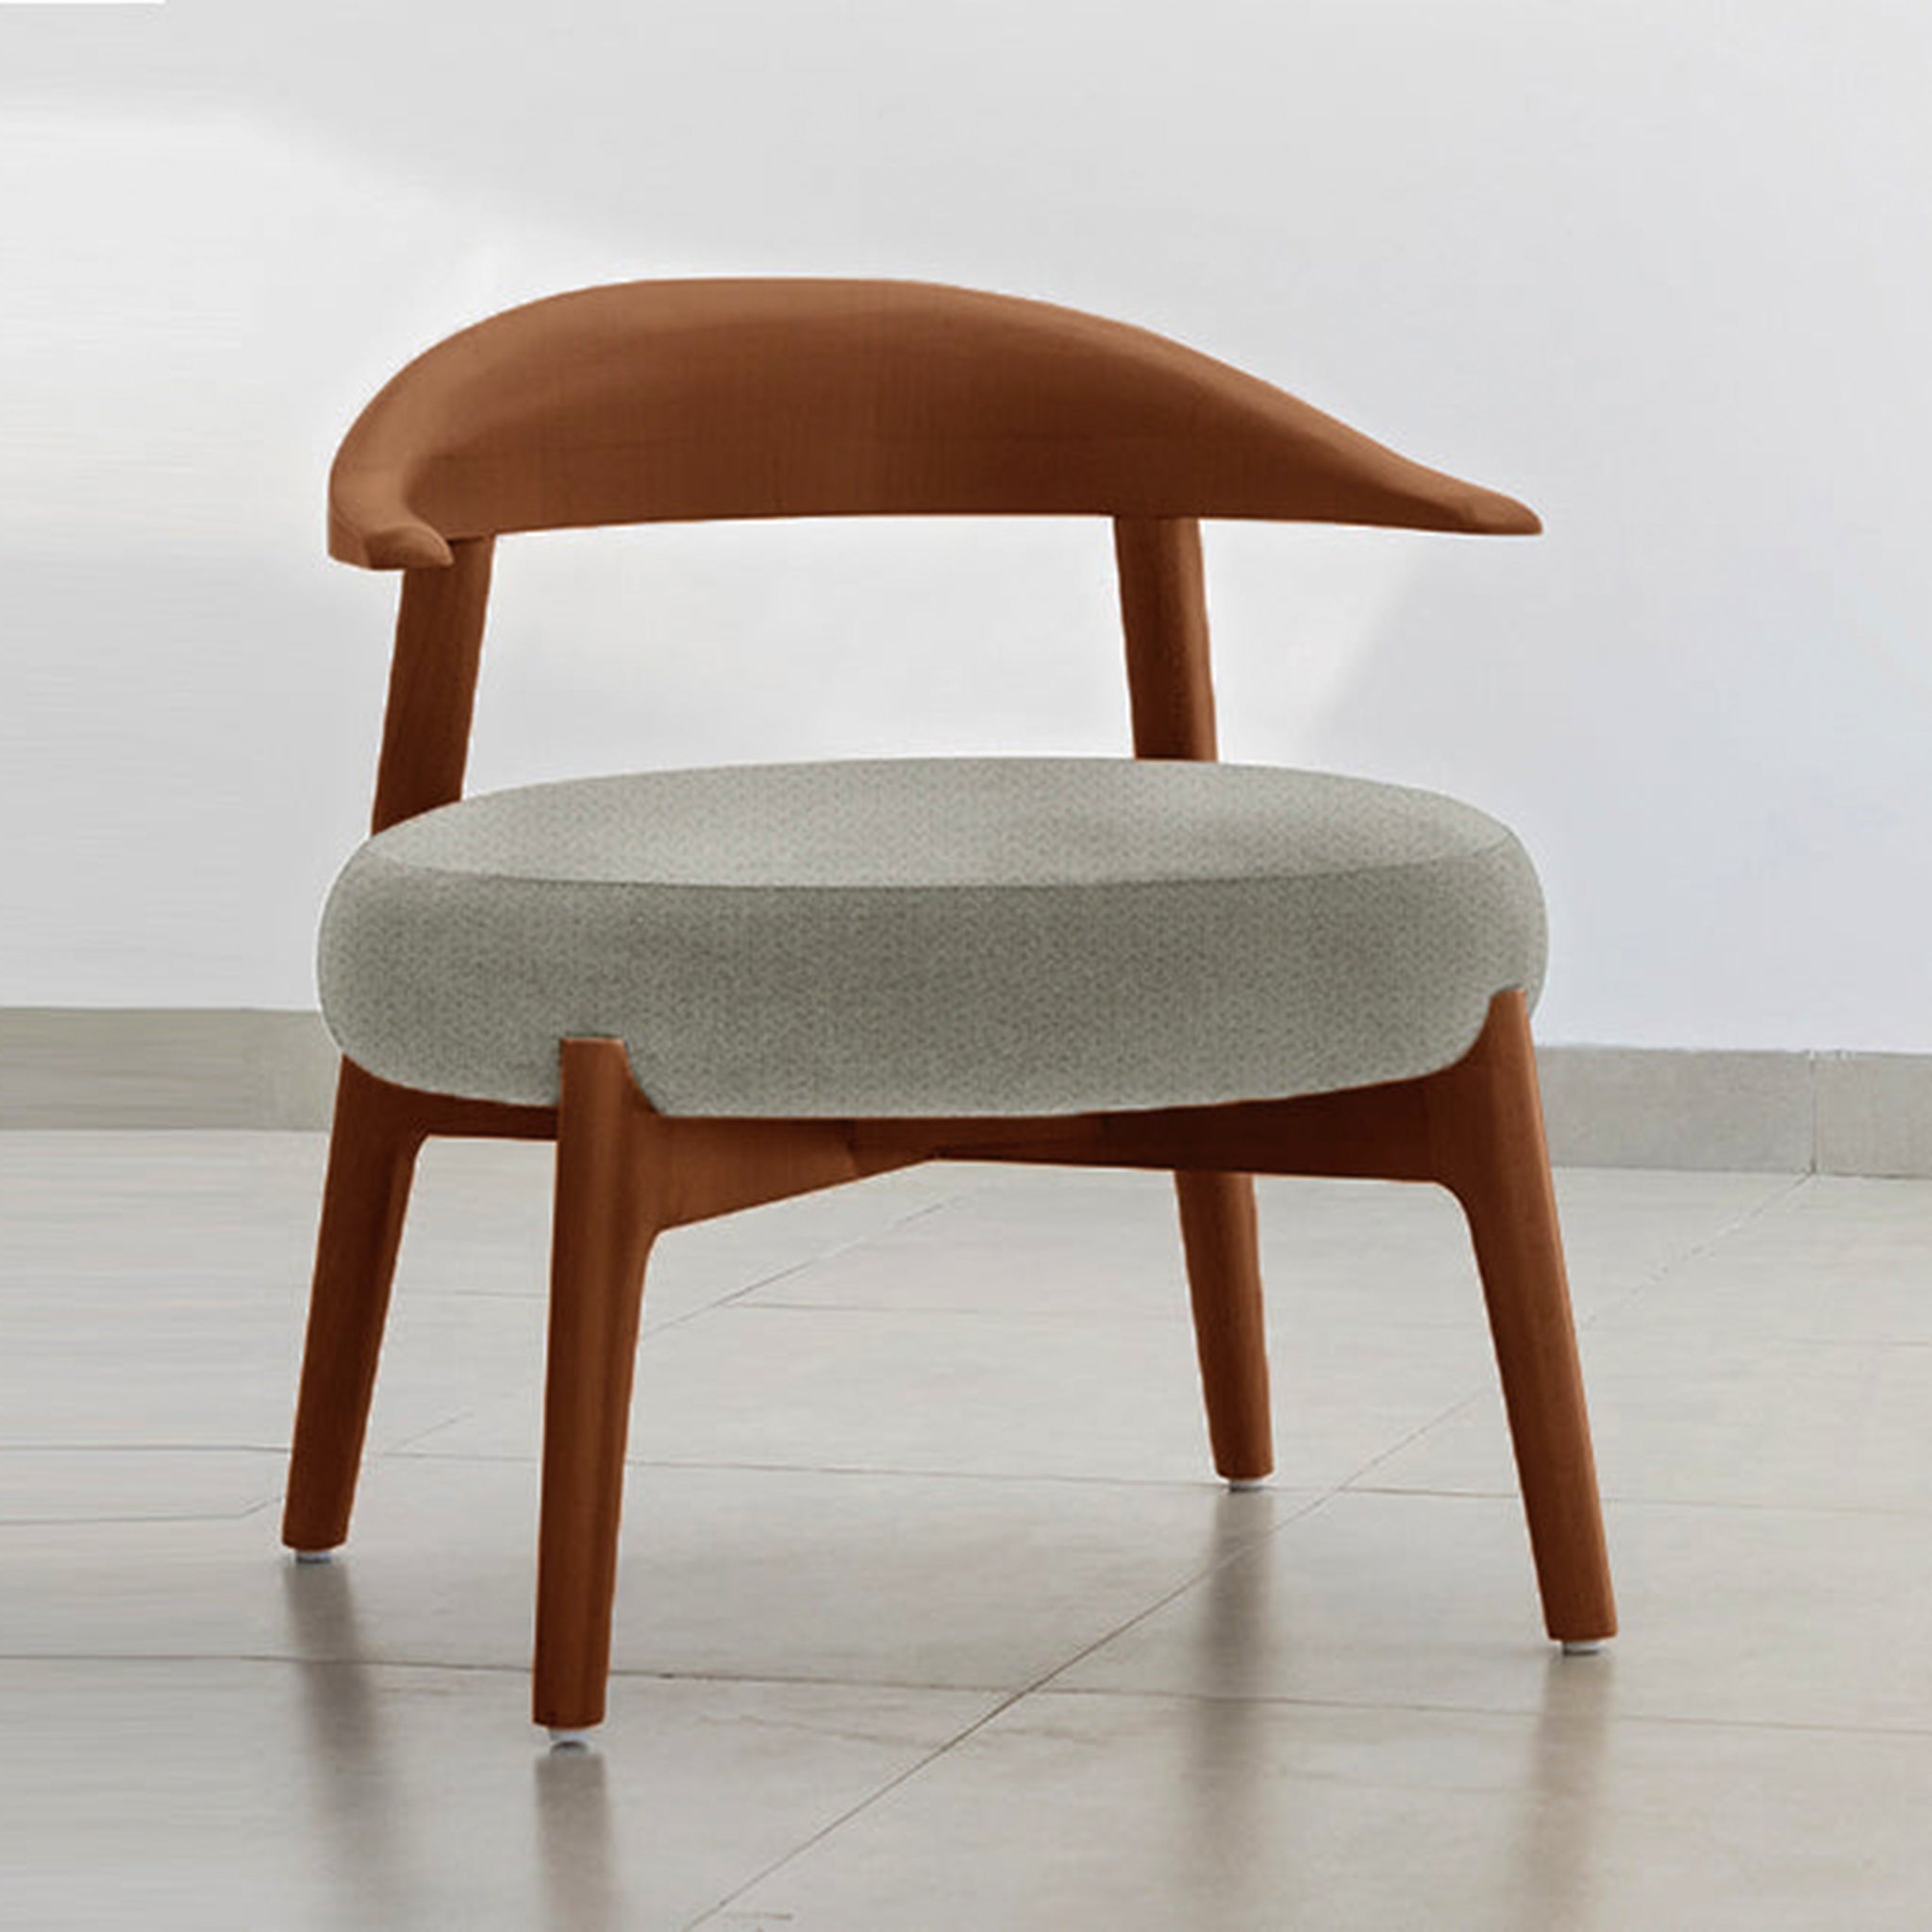 "The Hyde Accent Chair with unique wooden design and comfortable seating"